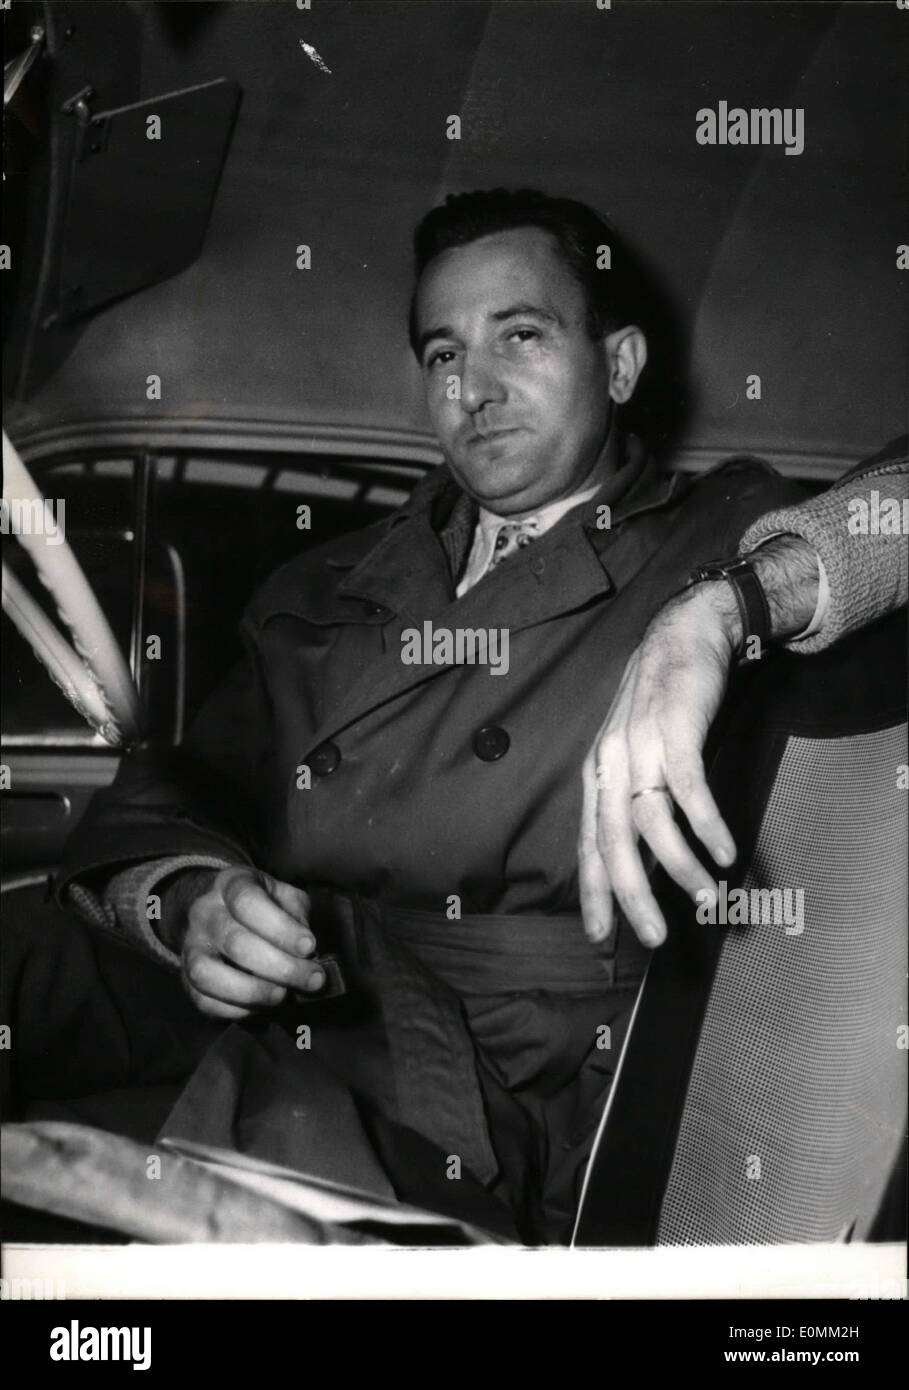 Nov. 11, 1955 - Hunger strike in front of Parliament: M. Raymond Pierre, a former resistant has been on hunger strike in front of the French Parliament as a Protest against the delay in recognizing certain rights of civil servants, who were in the resistance during the German Occupation. The unusual striker in his car facing the French Parliament House. Stock Photo